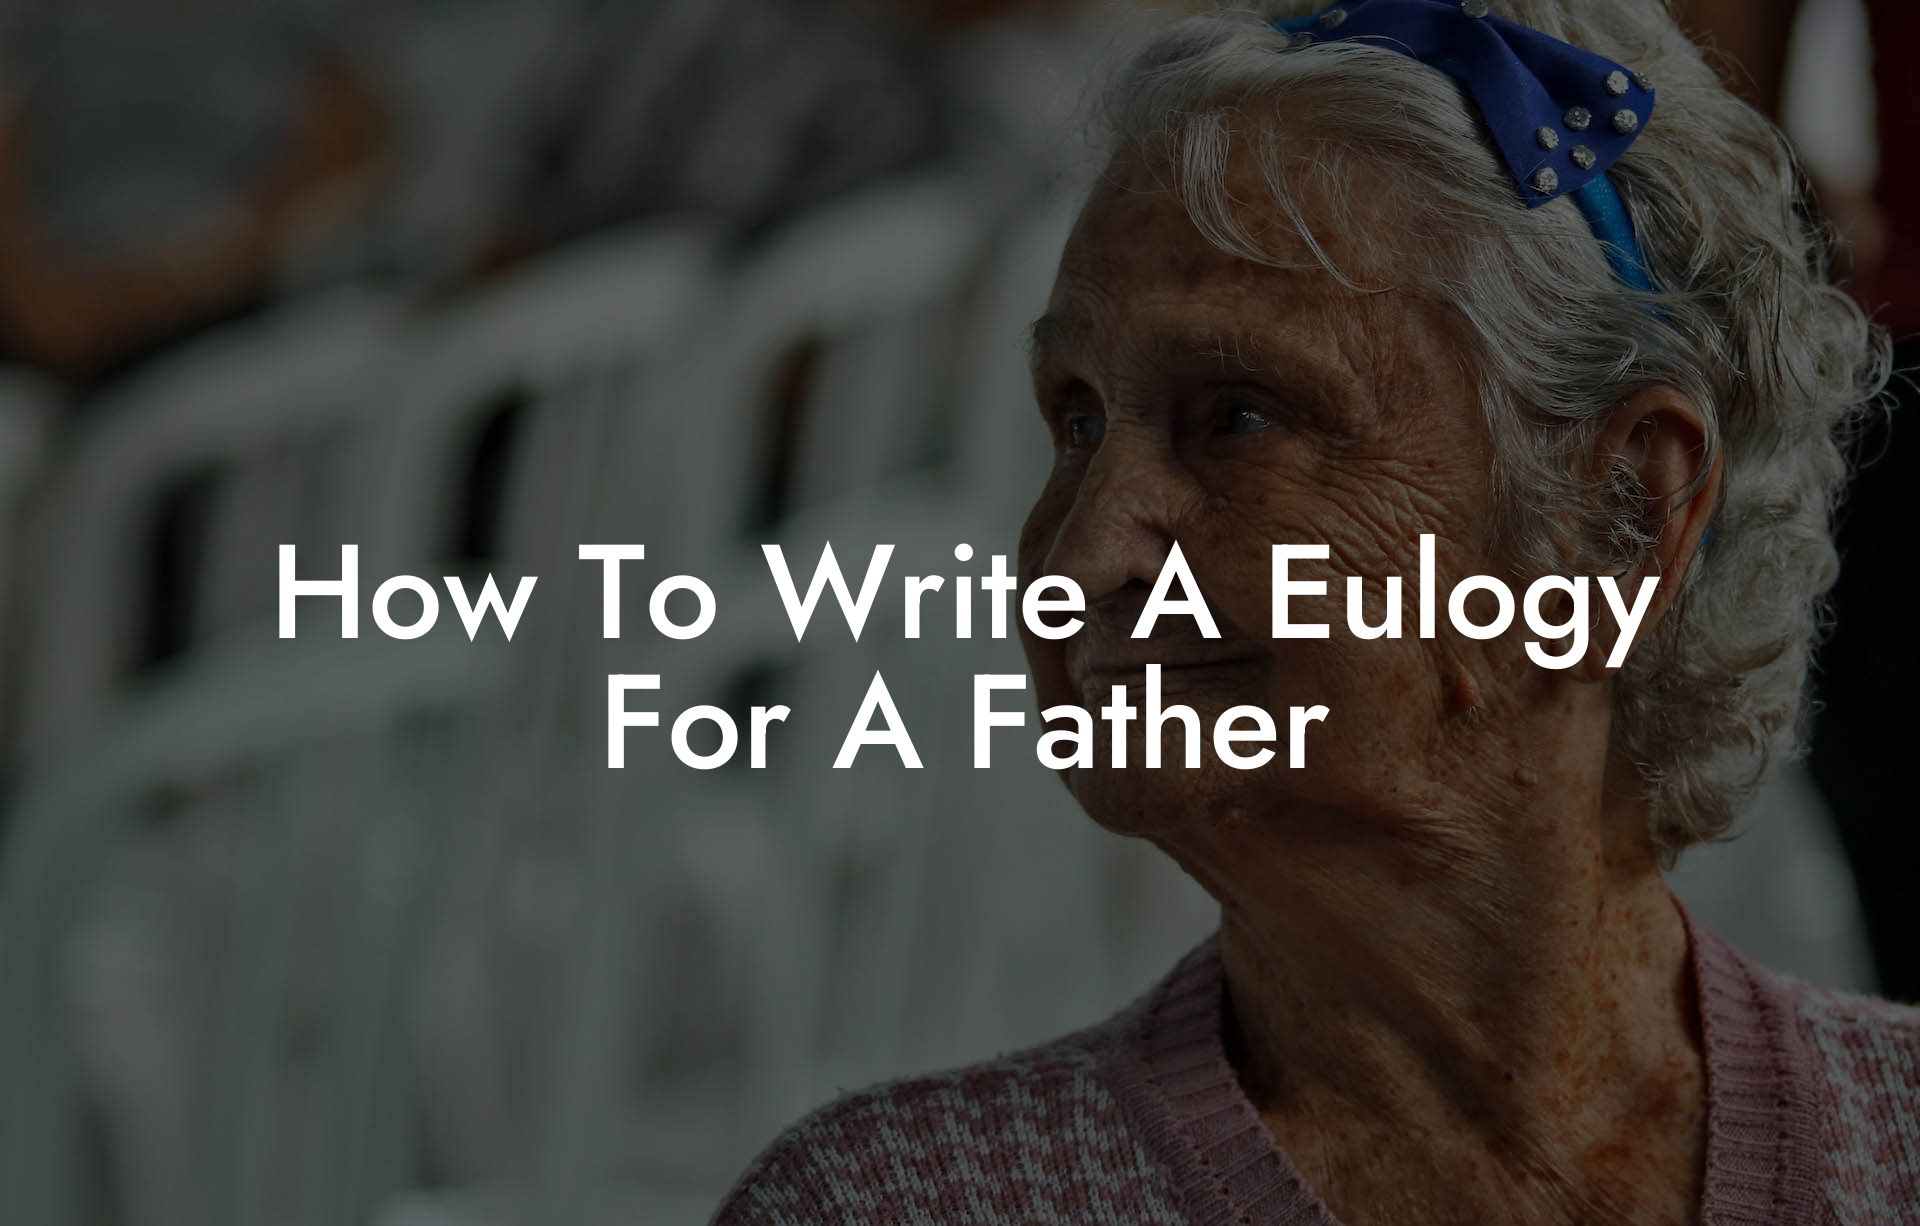 How To Write A Eulogy For A Father